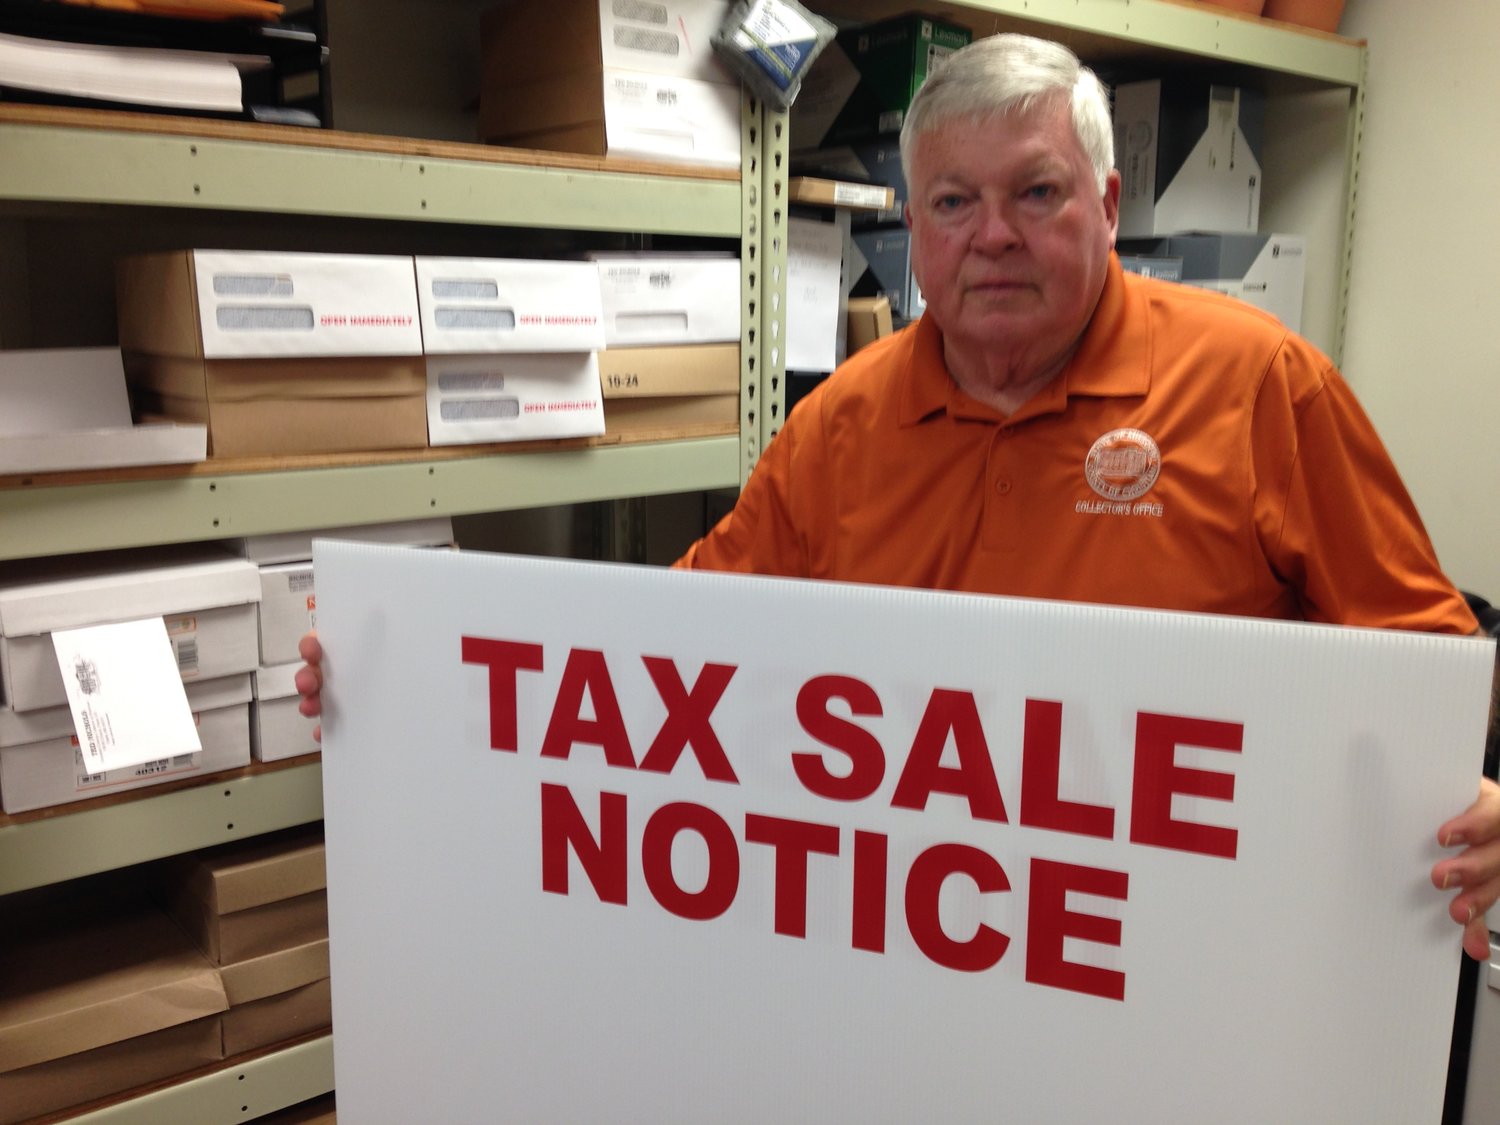 CHRISTIAN COUNTY COLLECTOR OF REVENUE TED NICHOLS shows one of the outdoor signs he and his staff use to post property that is found to be delinquent on personal property tax payments and subject to the collector’s annual tax sale.